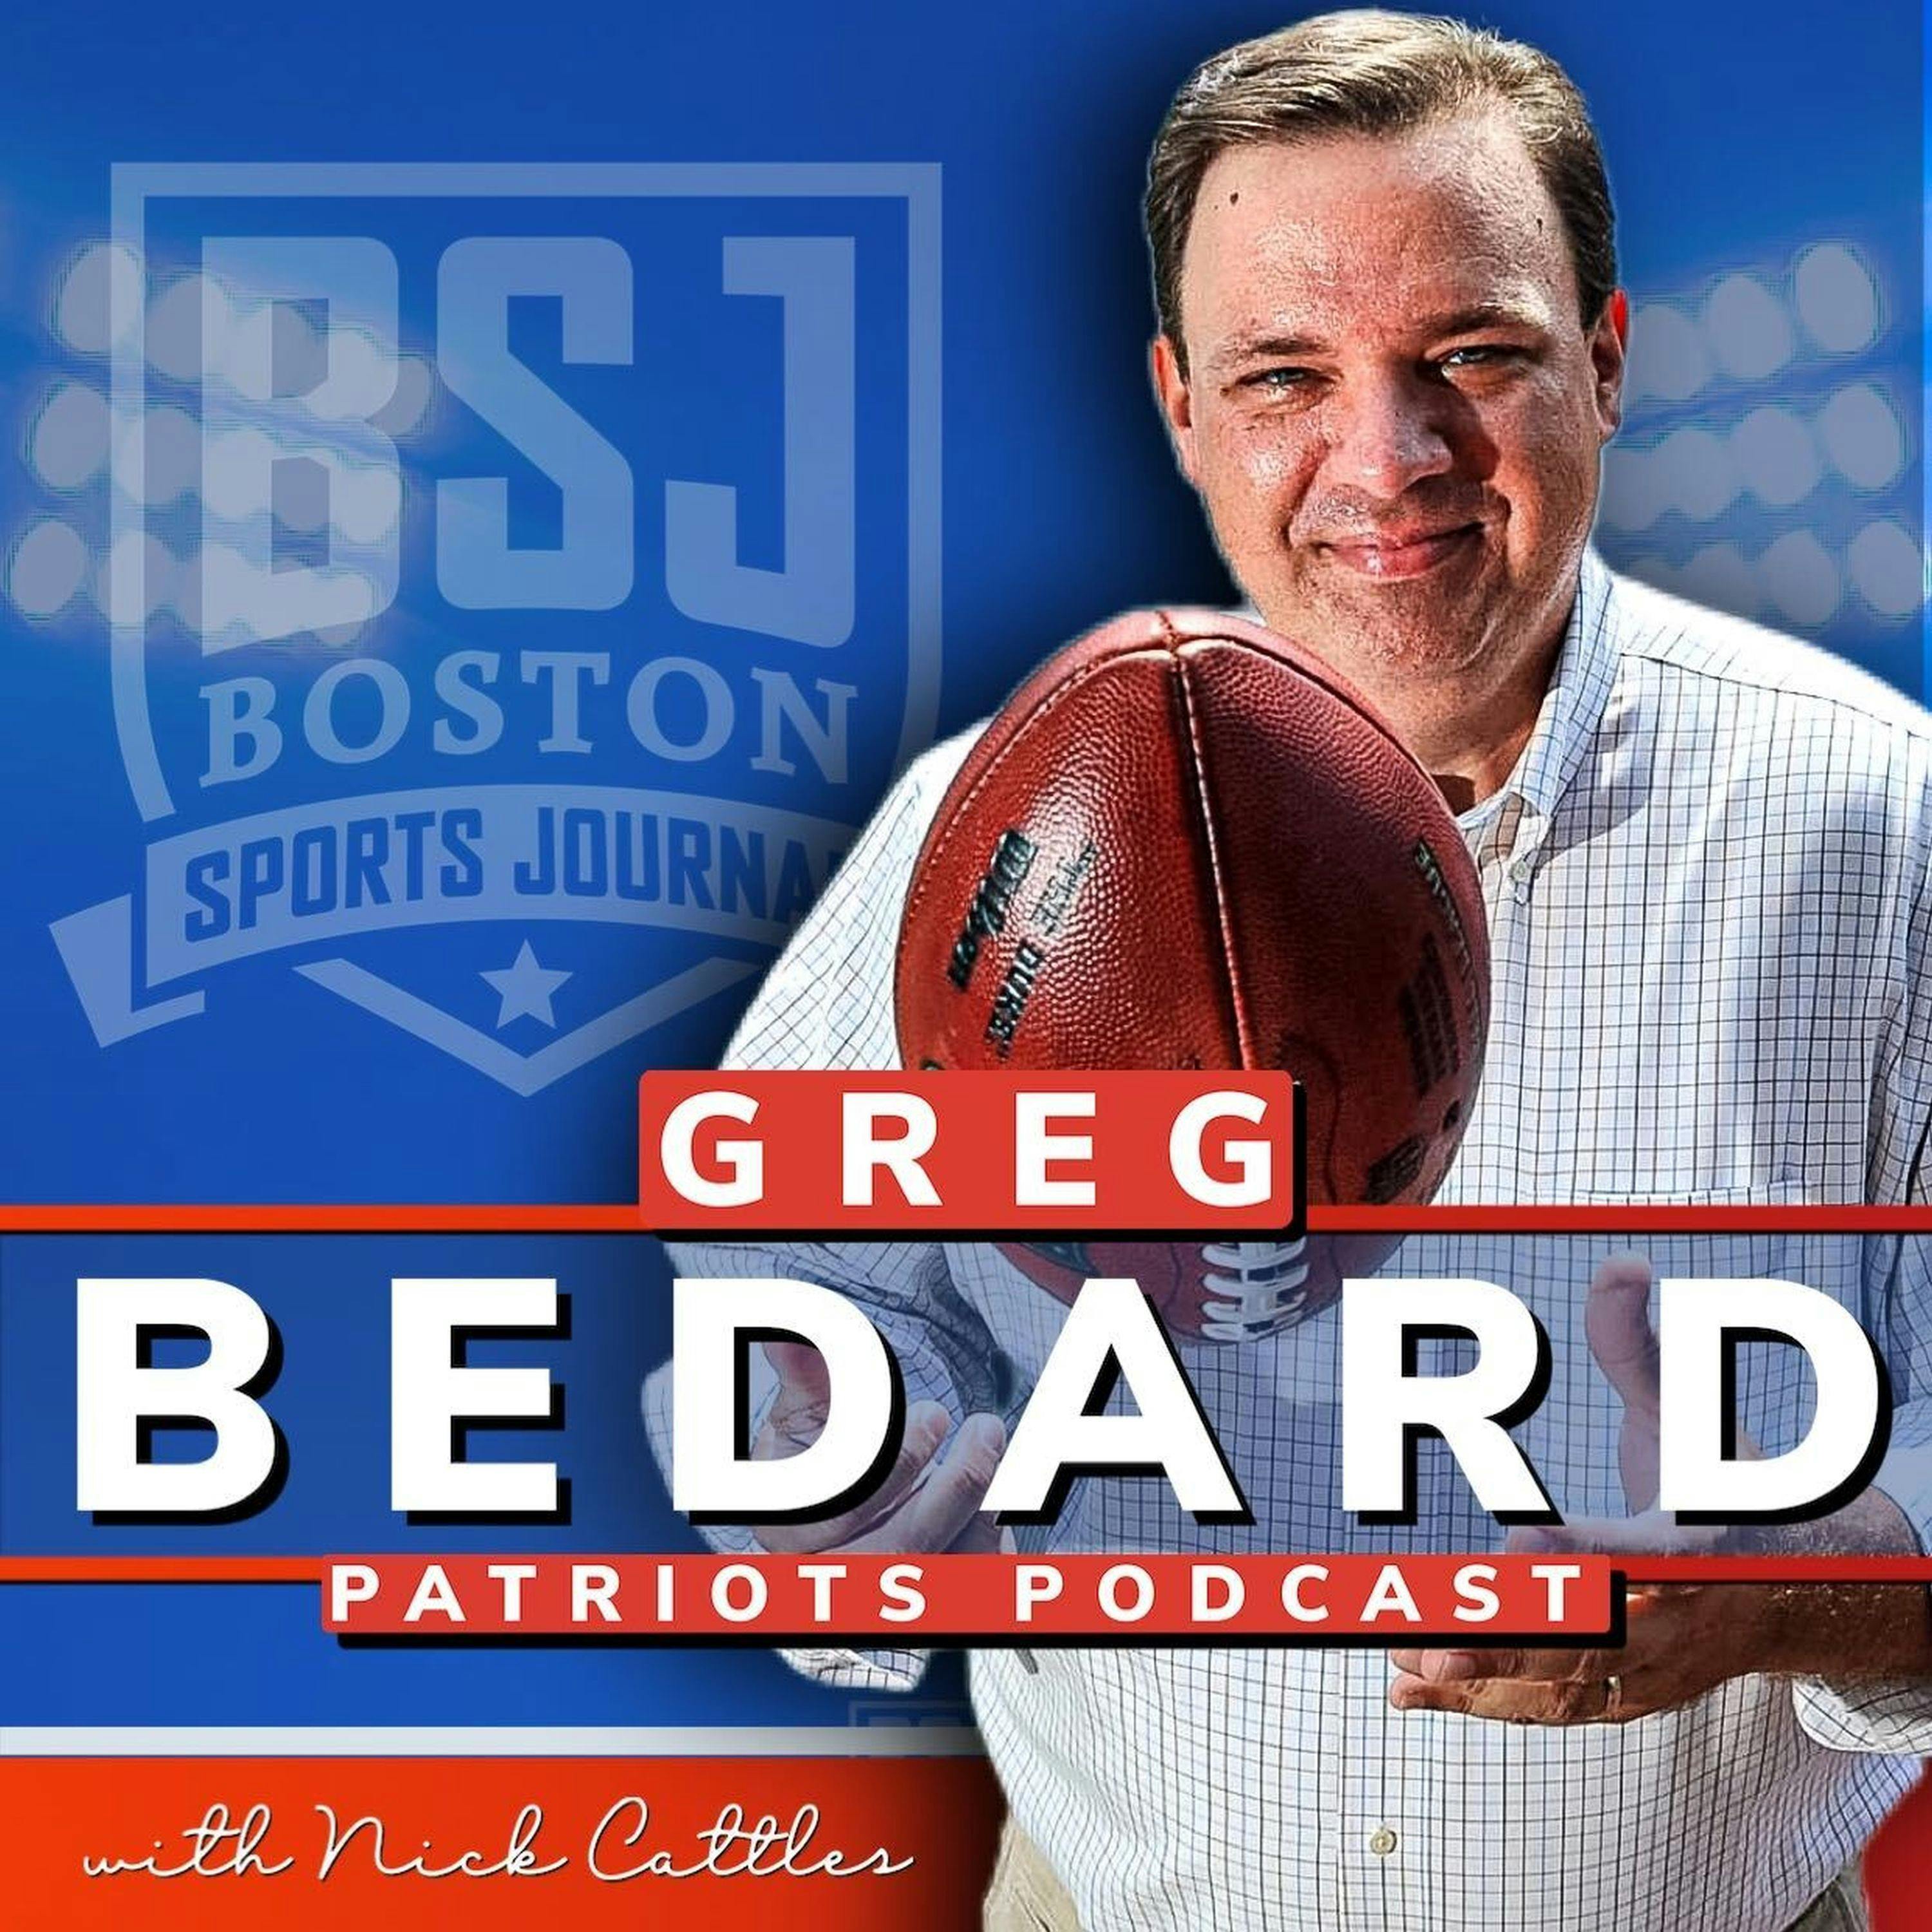 Greg Bedard Patriots Podcast with Nick Cattles podcast show image